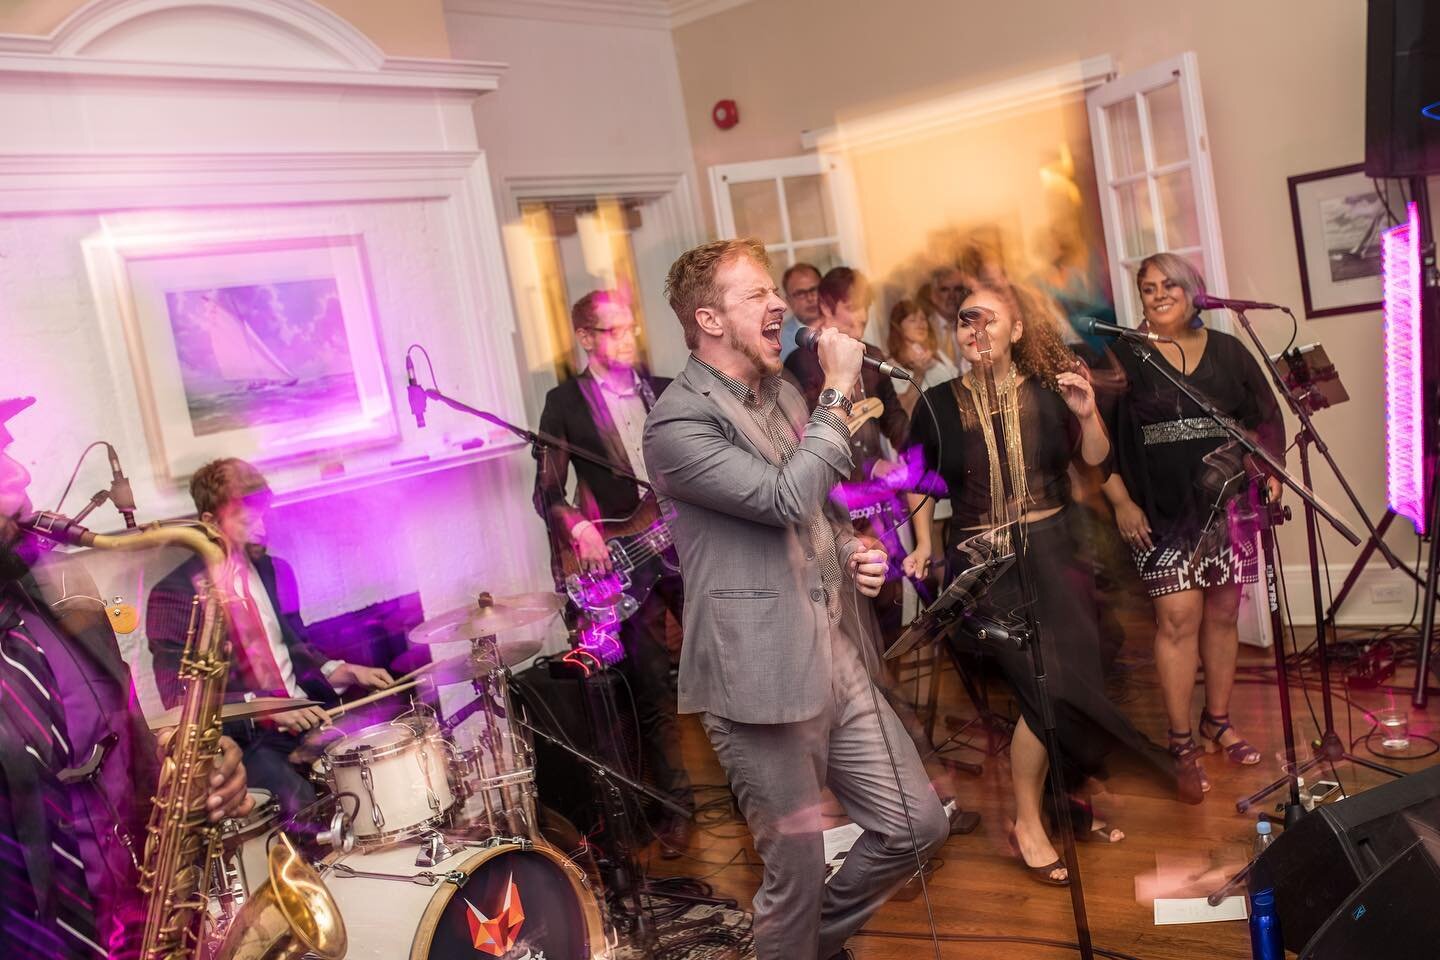 Wedding season 2022 is on fire!! 🔥🔥🔥 We can&rsquo;t WAIT to see you all again. For booking inquires contact bookings@slyfoxcoverband.com. LETS DANCE! 💃🕺🏻🥂🍾